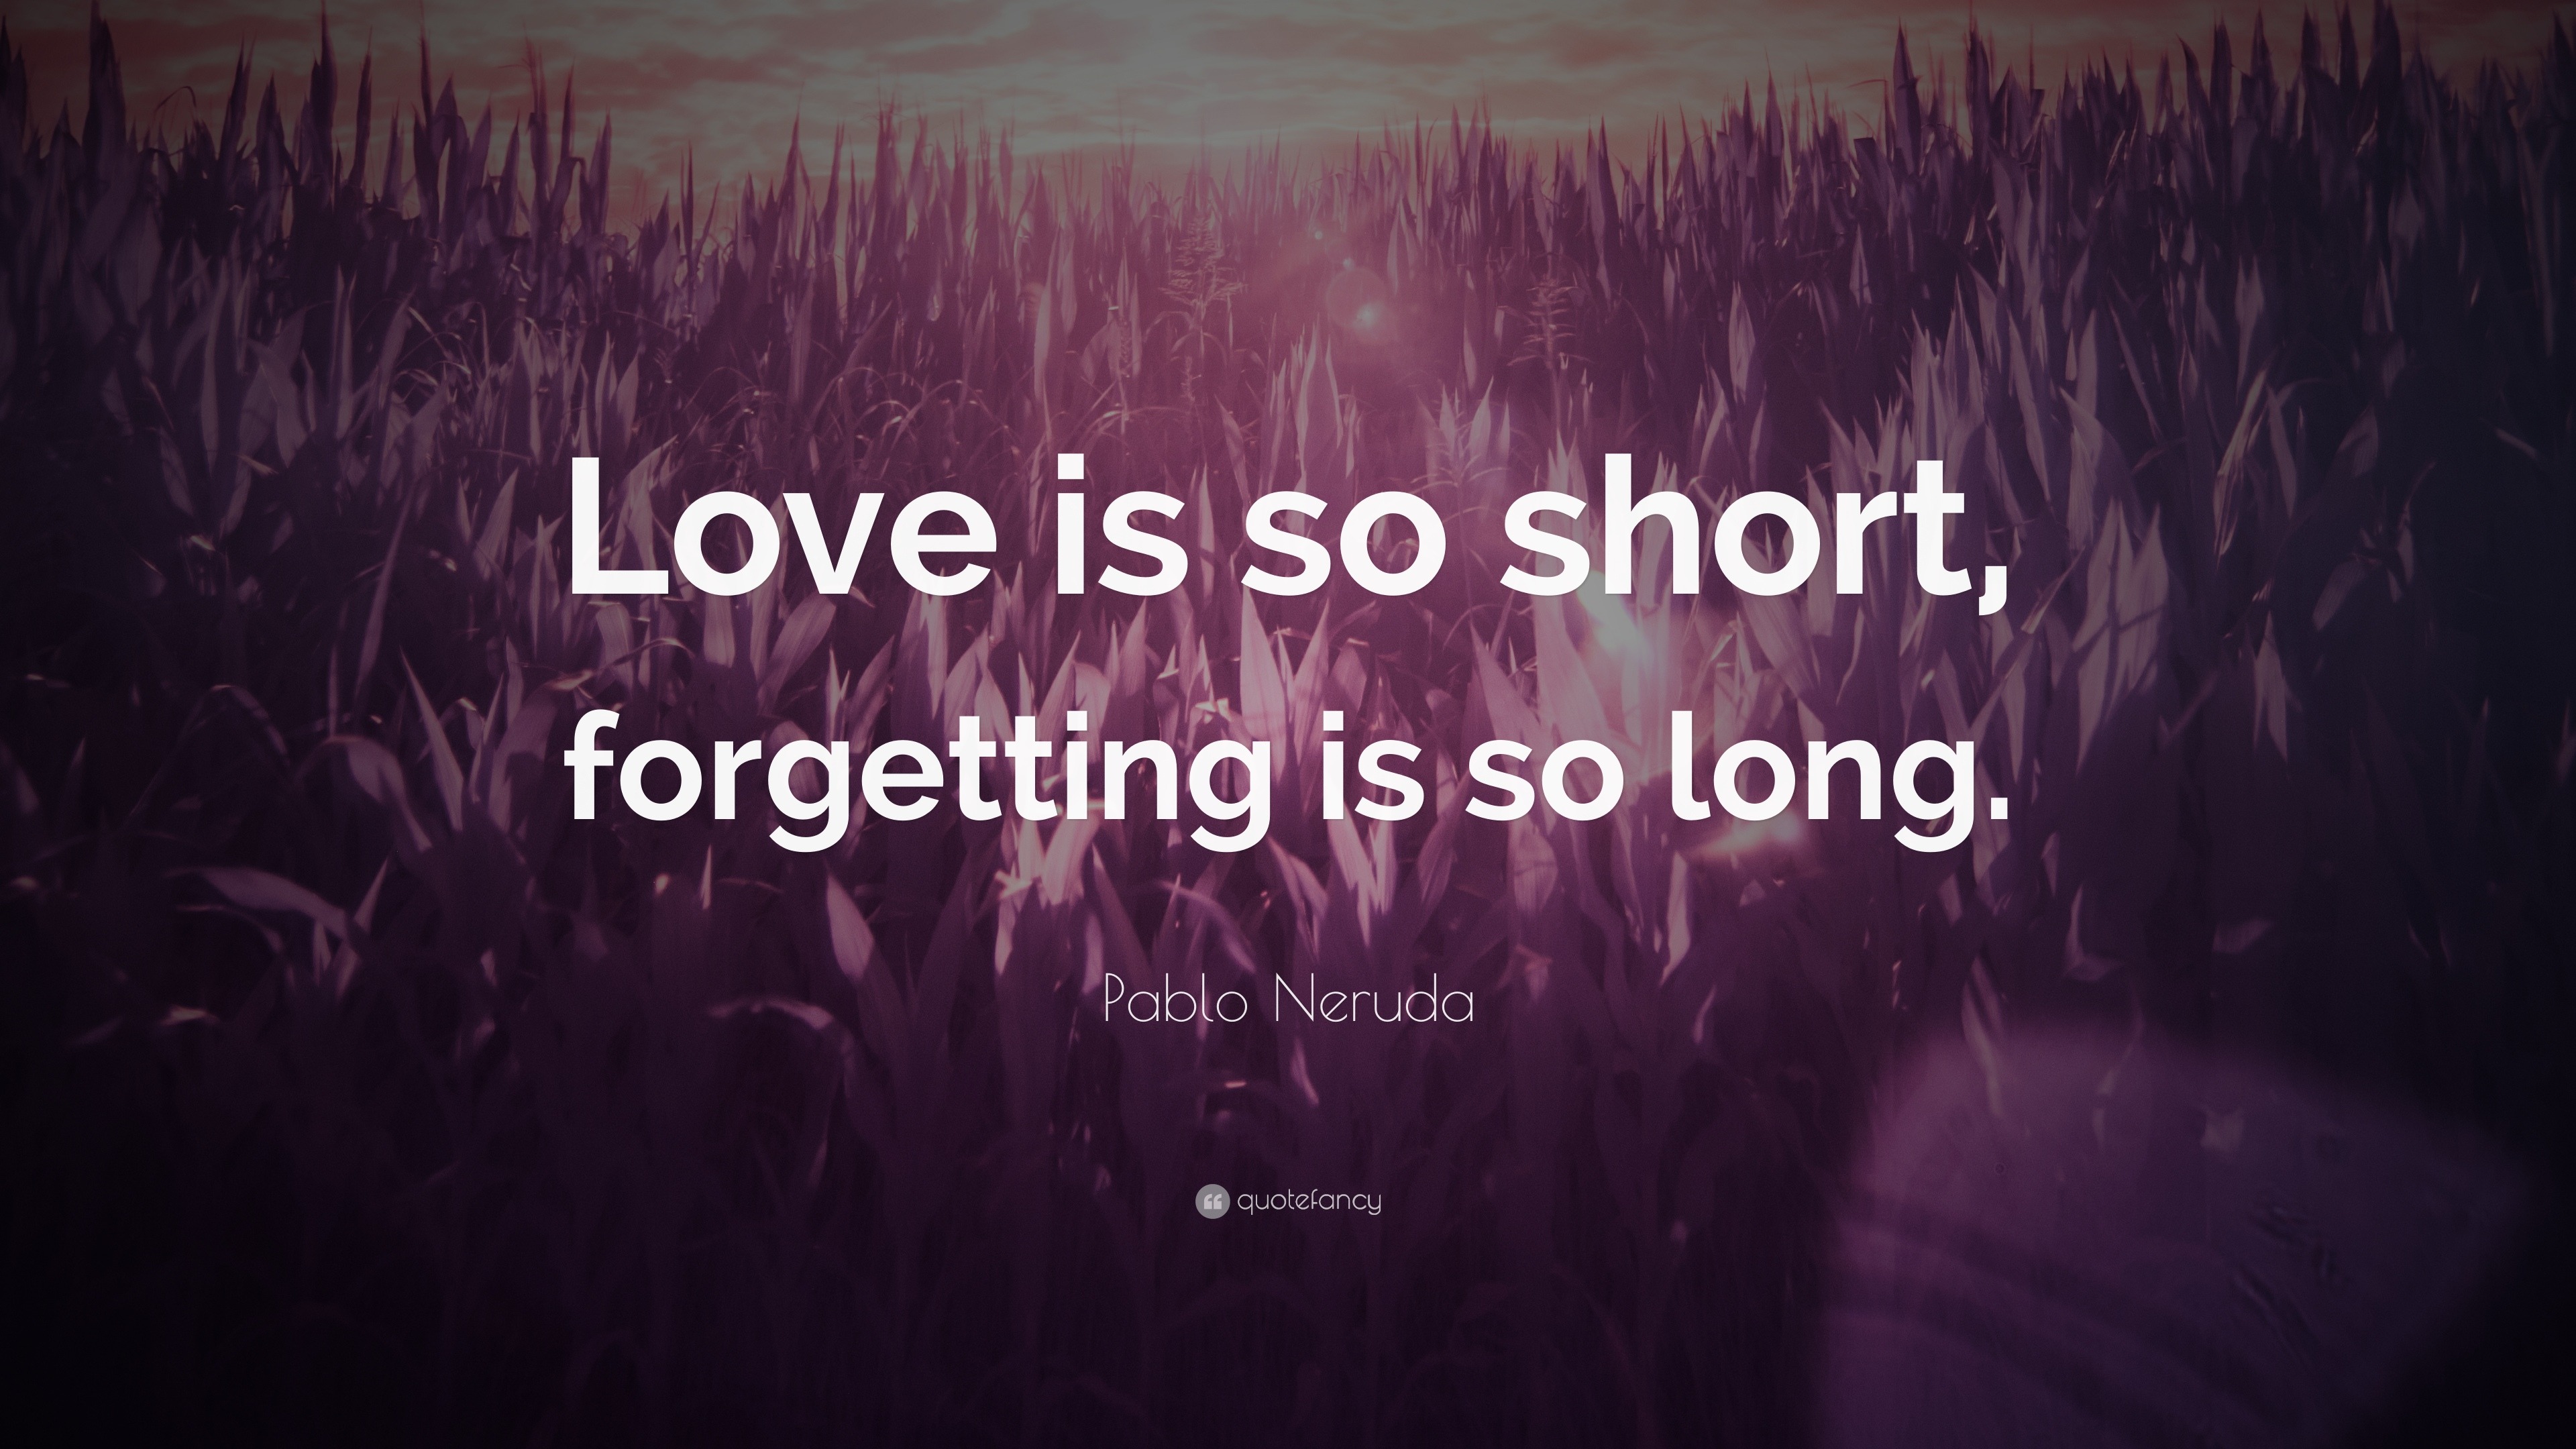 Pablo Neruda Quote: “Love is so short, forgetting is so long.”